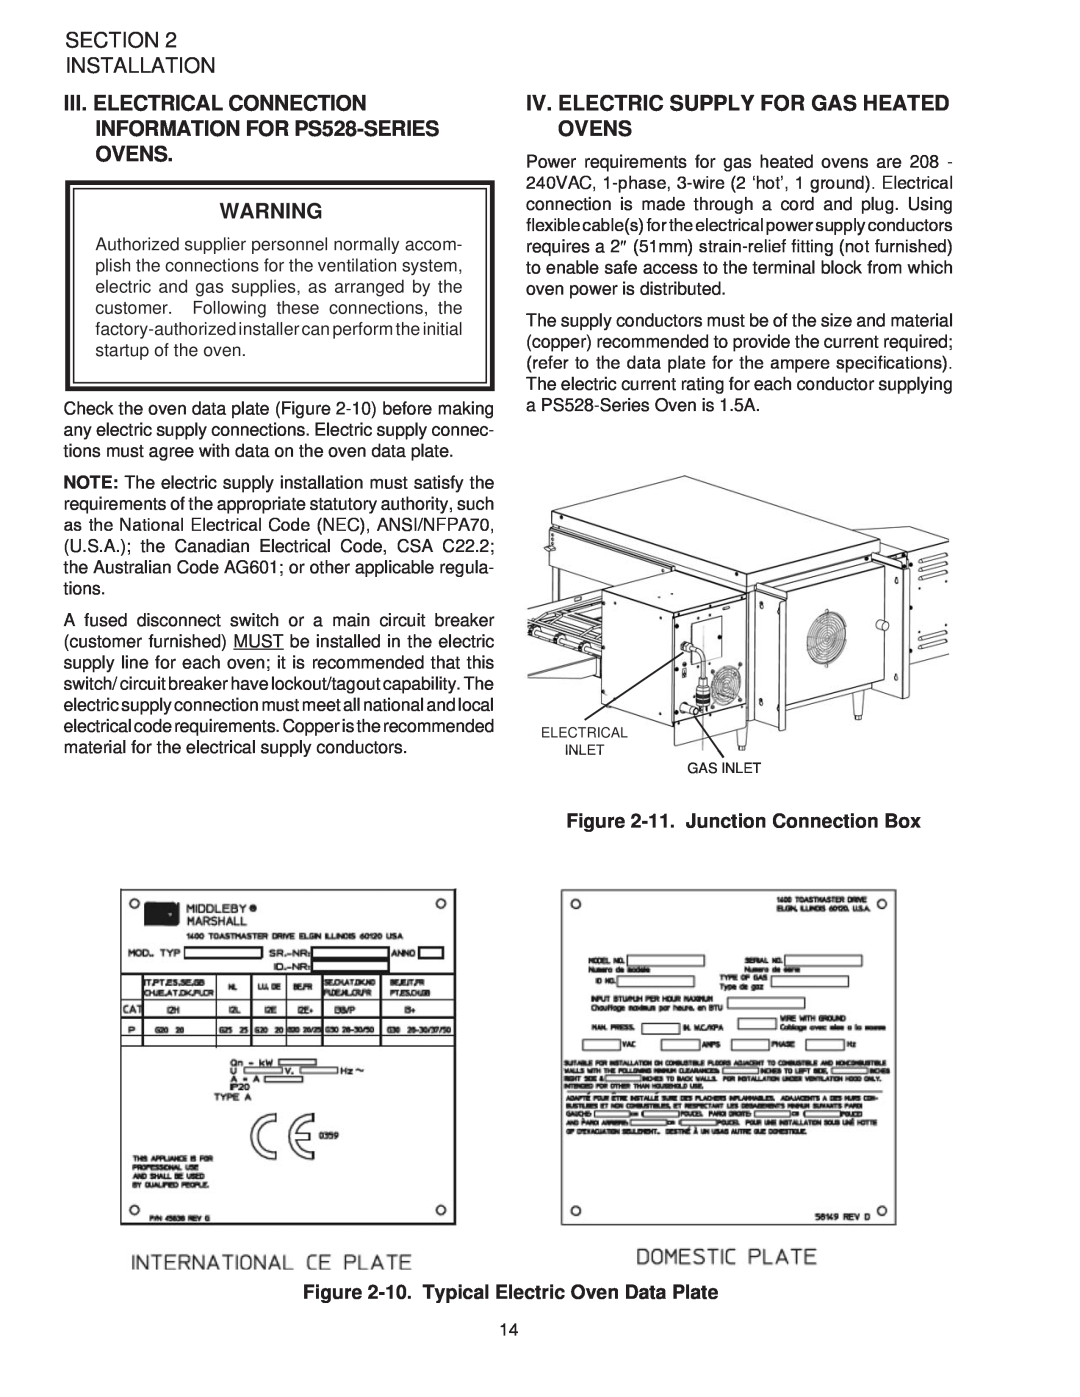 Middleby Marshall PS528G III. ELECTRICAL CONNECTION INFORMATION FOR PS528-SERIES OVENS, Section Installation 